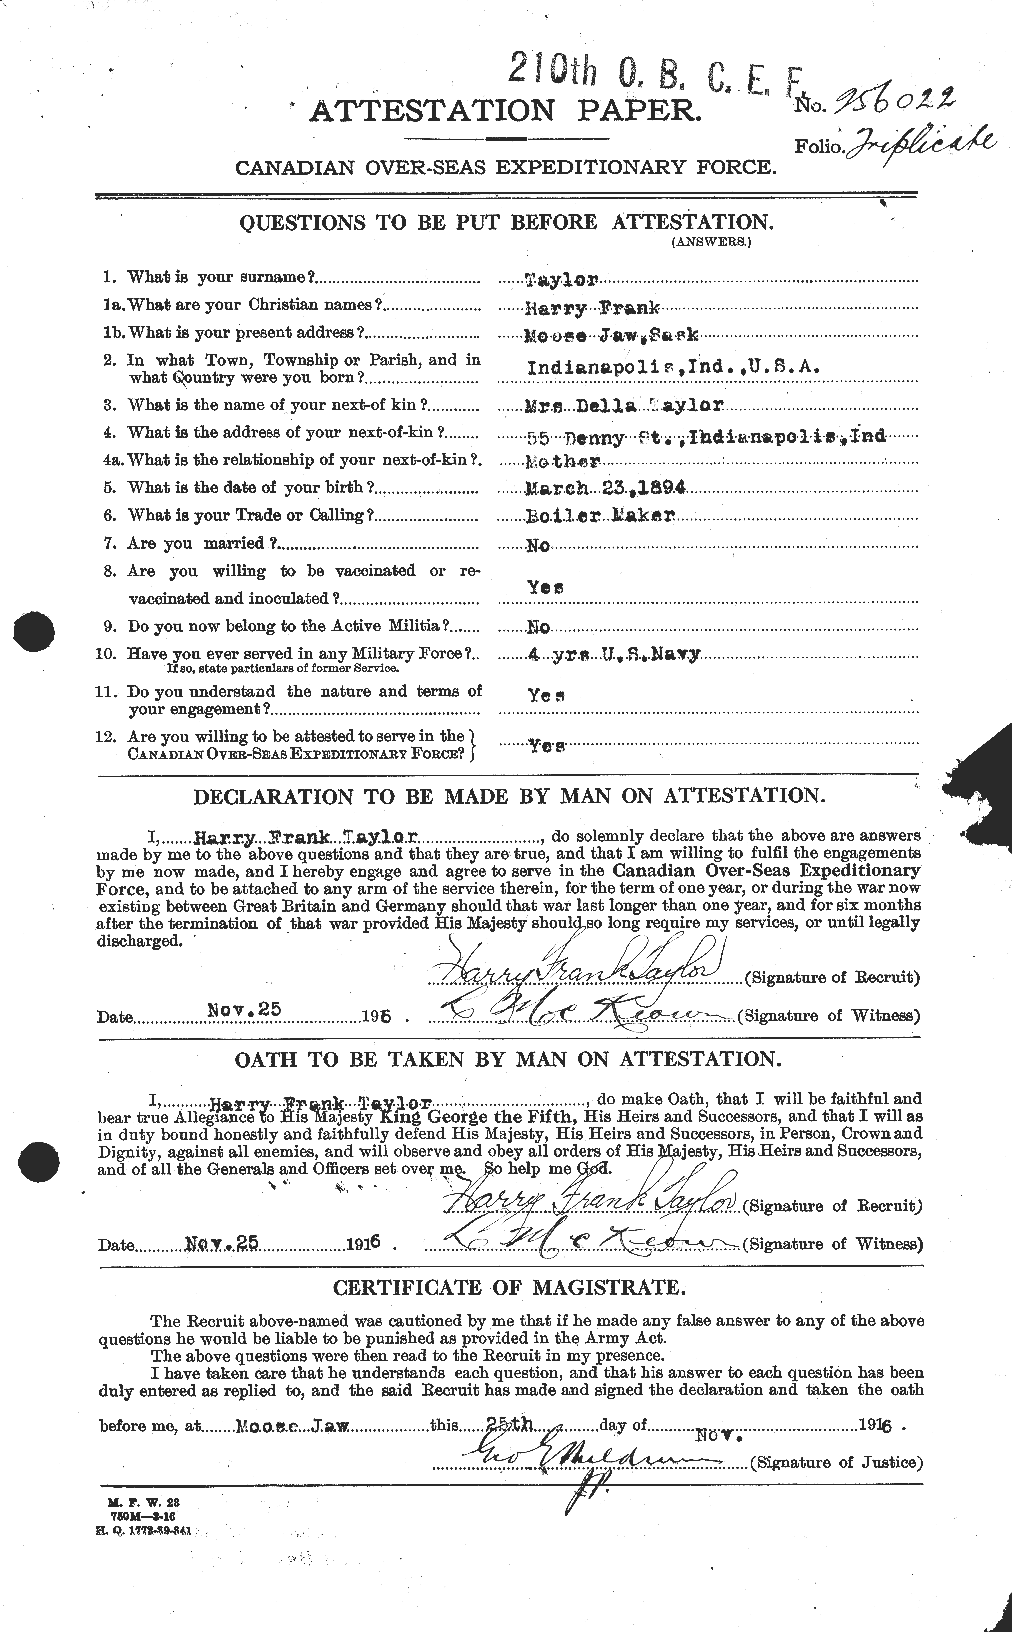 Personnel Records of the First World War - CEF 626494a